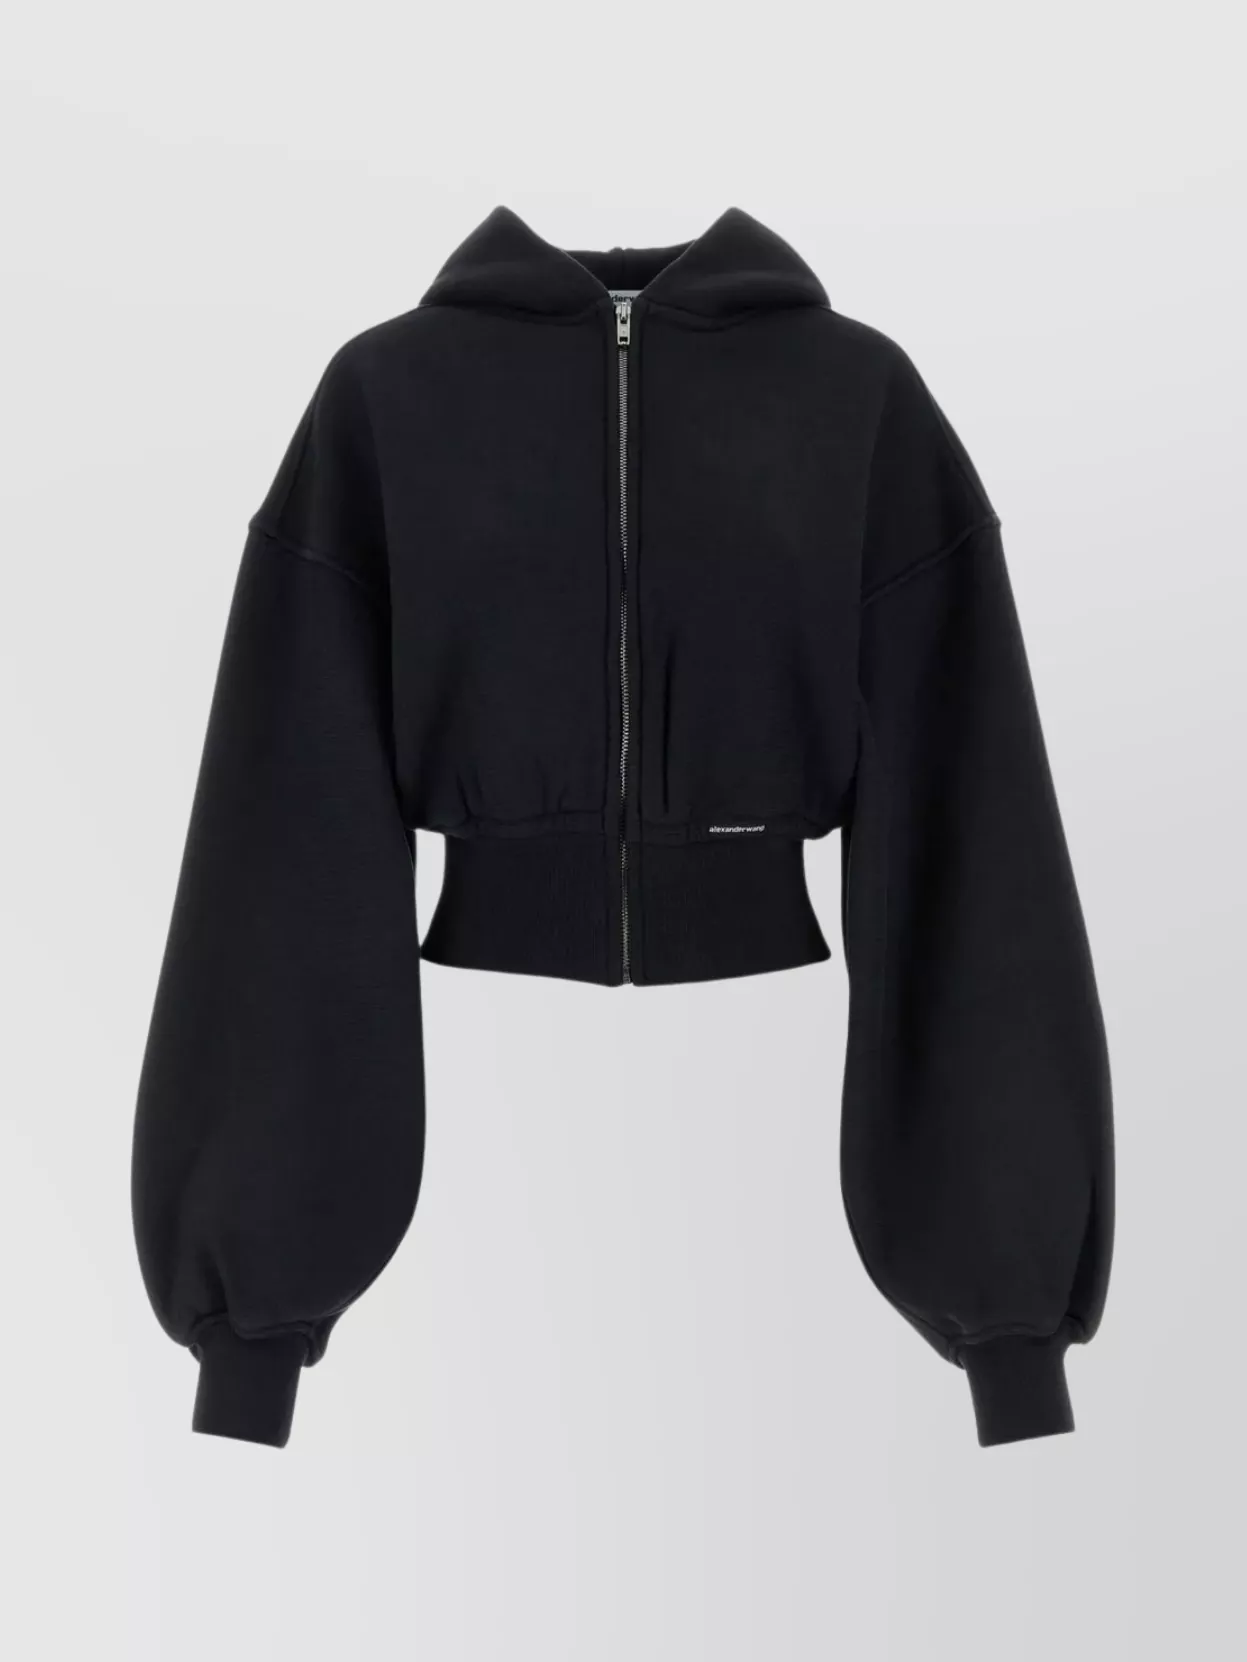 ALEXANDER WANG COTTON SWEATSHIRT WITH CROPPED CUT AND HOOD